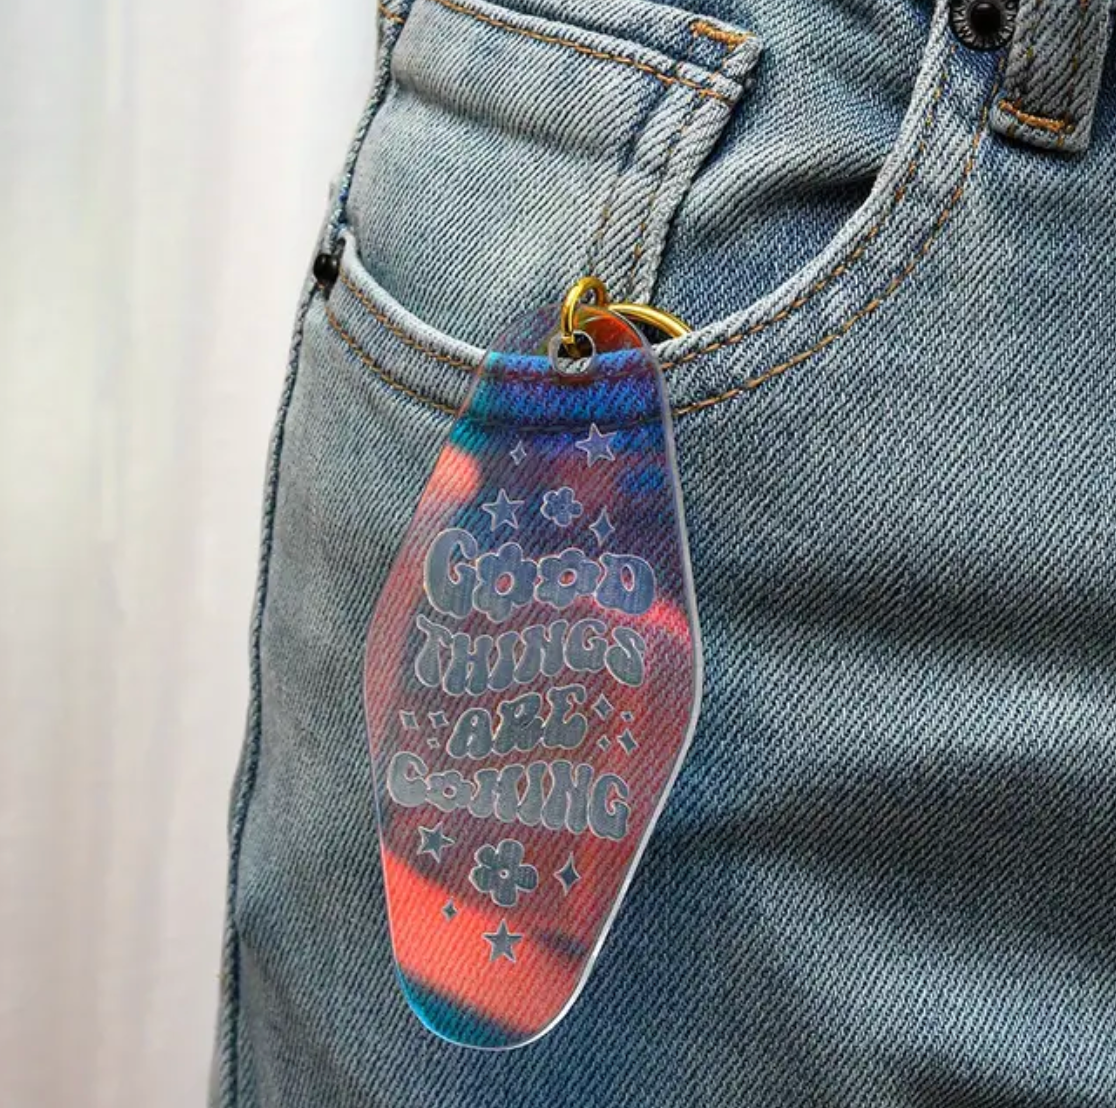 Good Things Are Coming Keychain